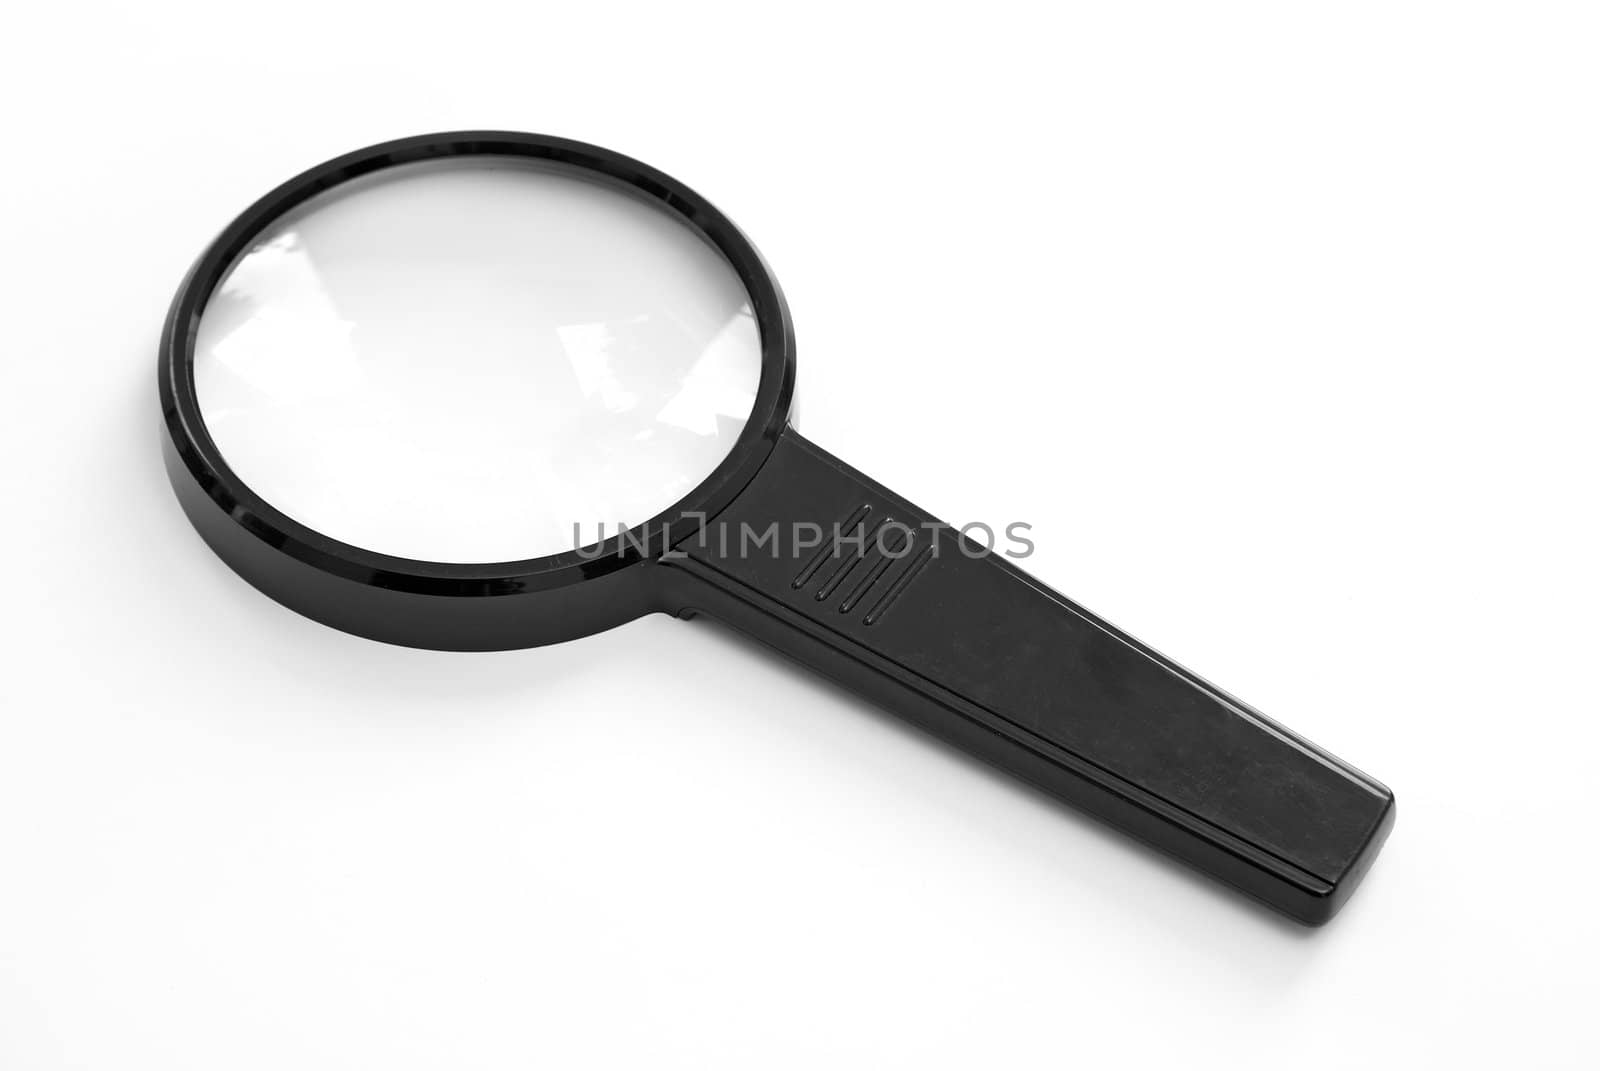 An isolated magnifying glass over white background.